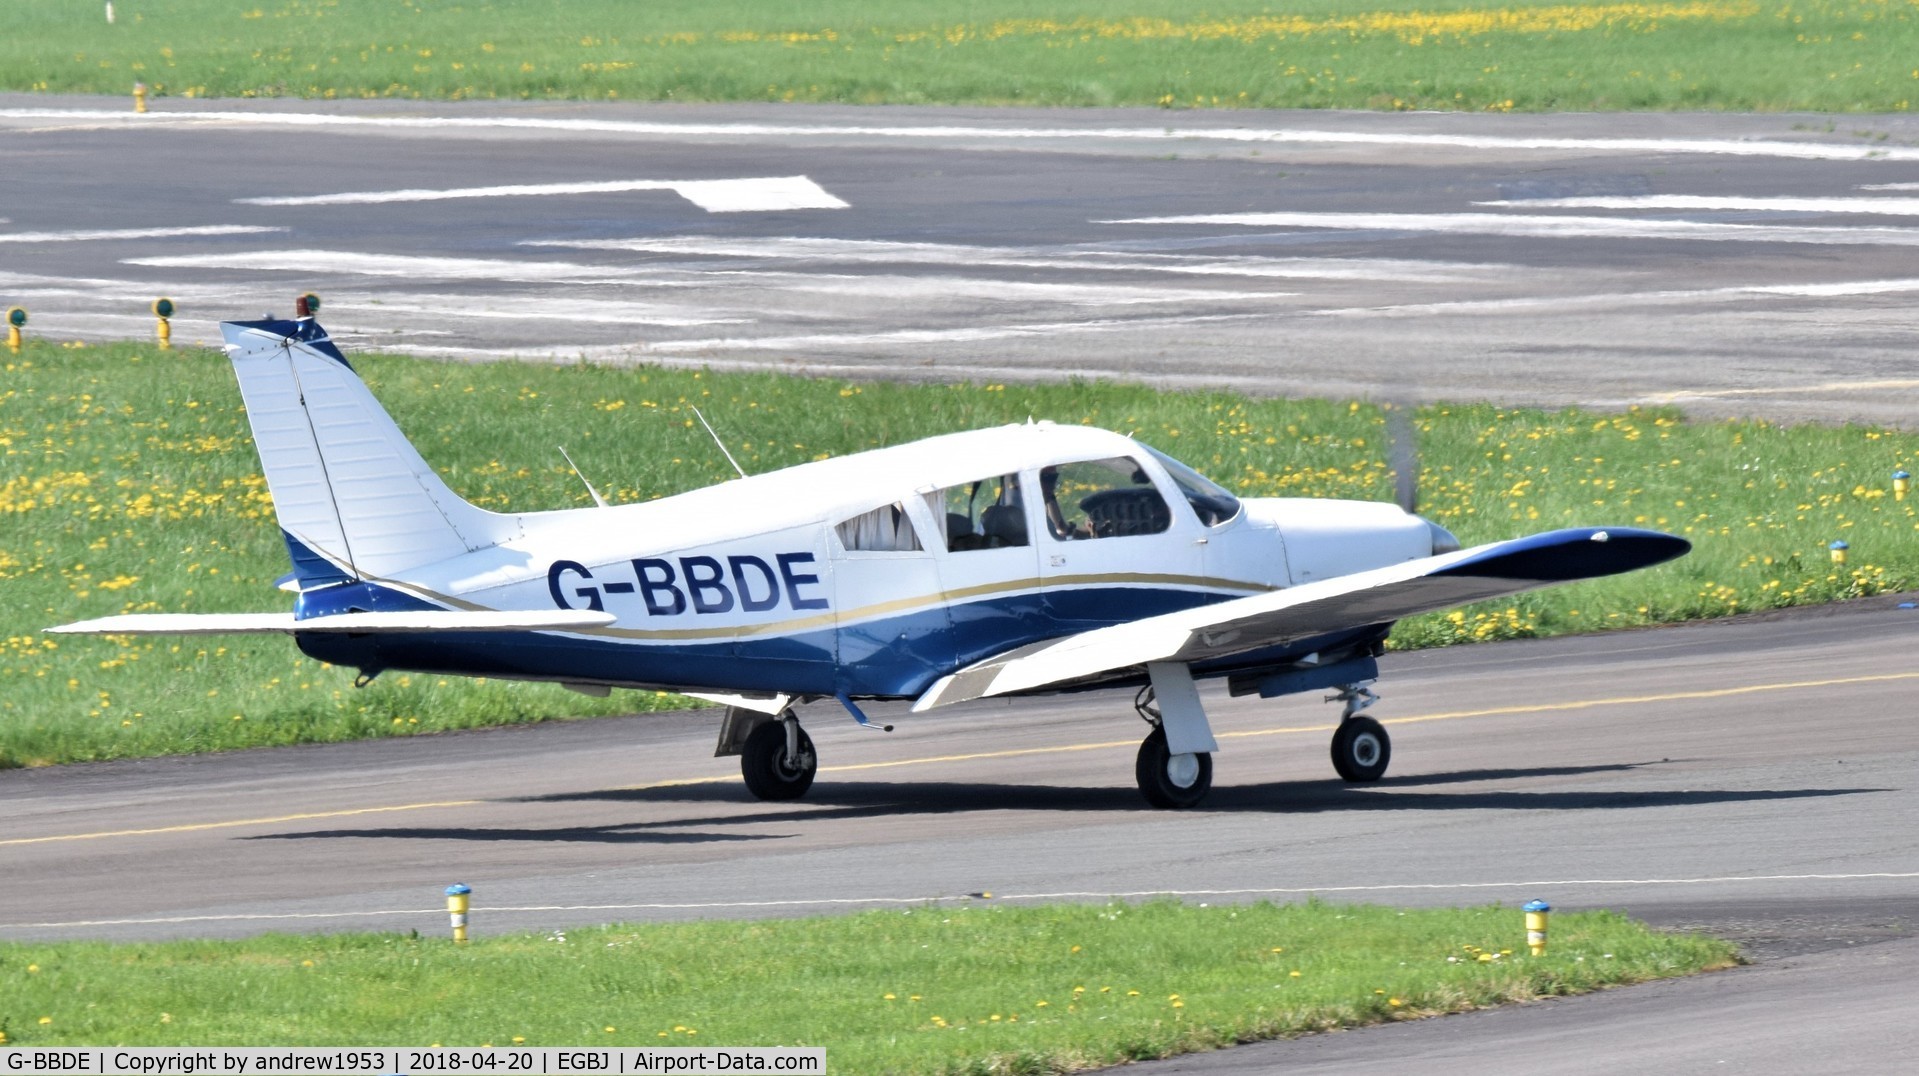 G-BBDE, 1973 Piper PA-28R-200-2 Cherokee Arrow II C/N 28R-7335250, G-BBDE at Gloucestershire Airport.